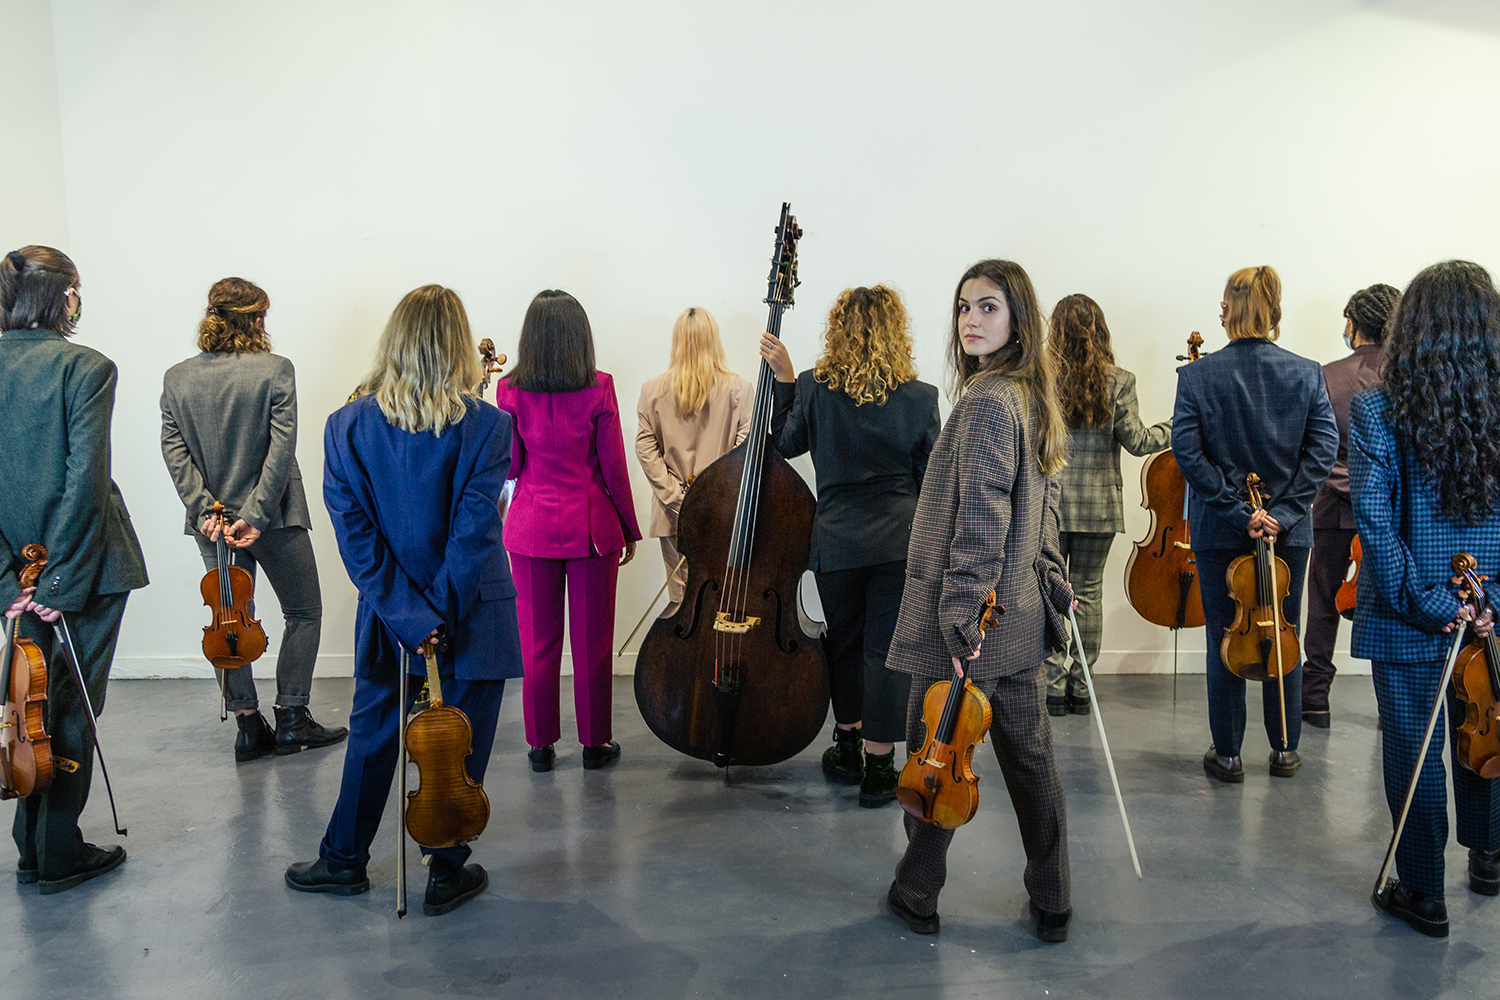 A group of people wearing suits, holding string instruments and standing with their backs to the camera with one woman turning around to look into the camera